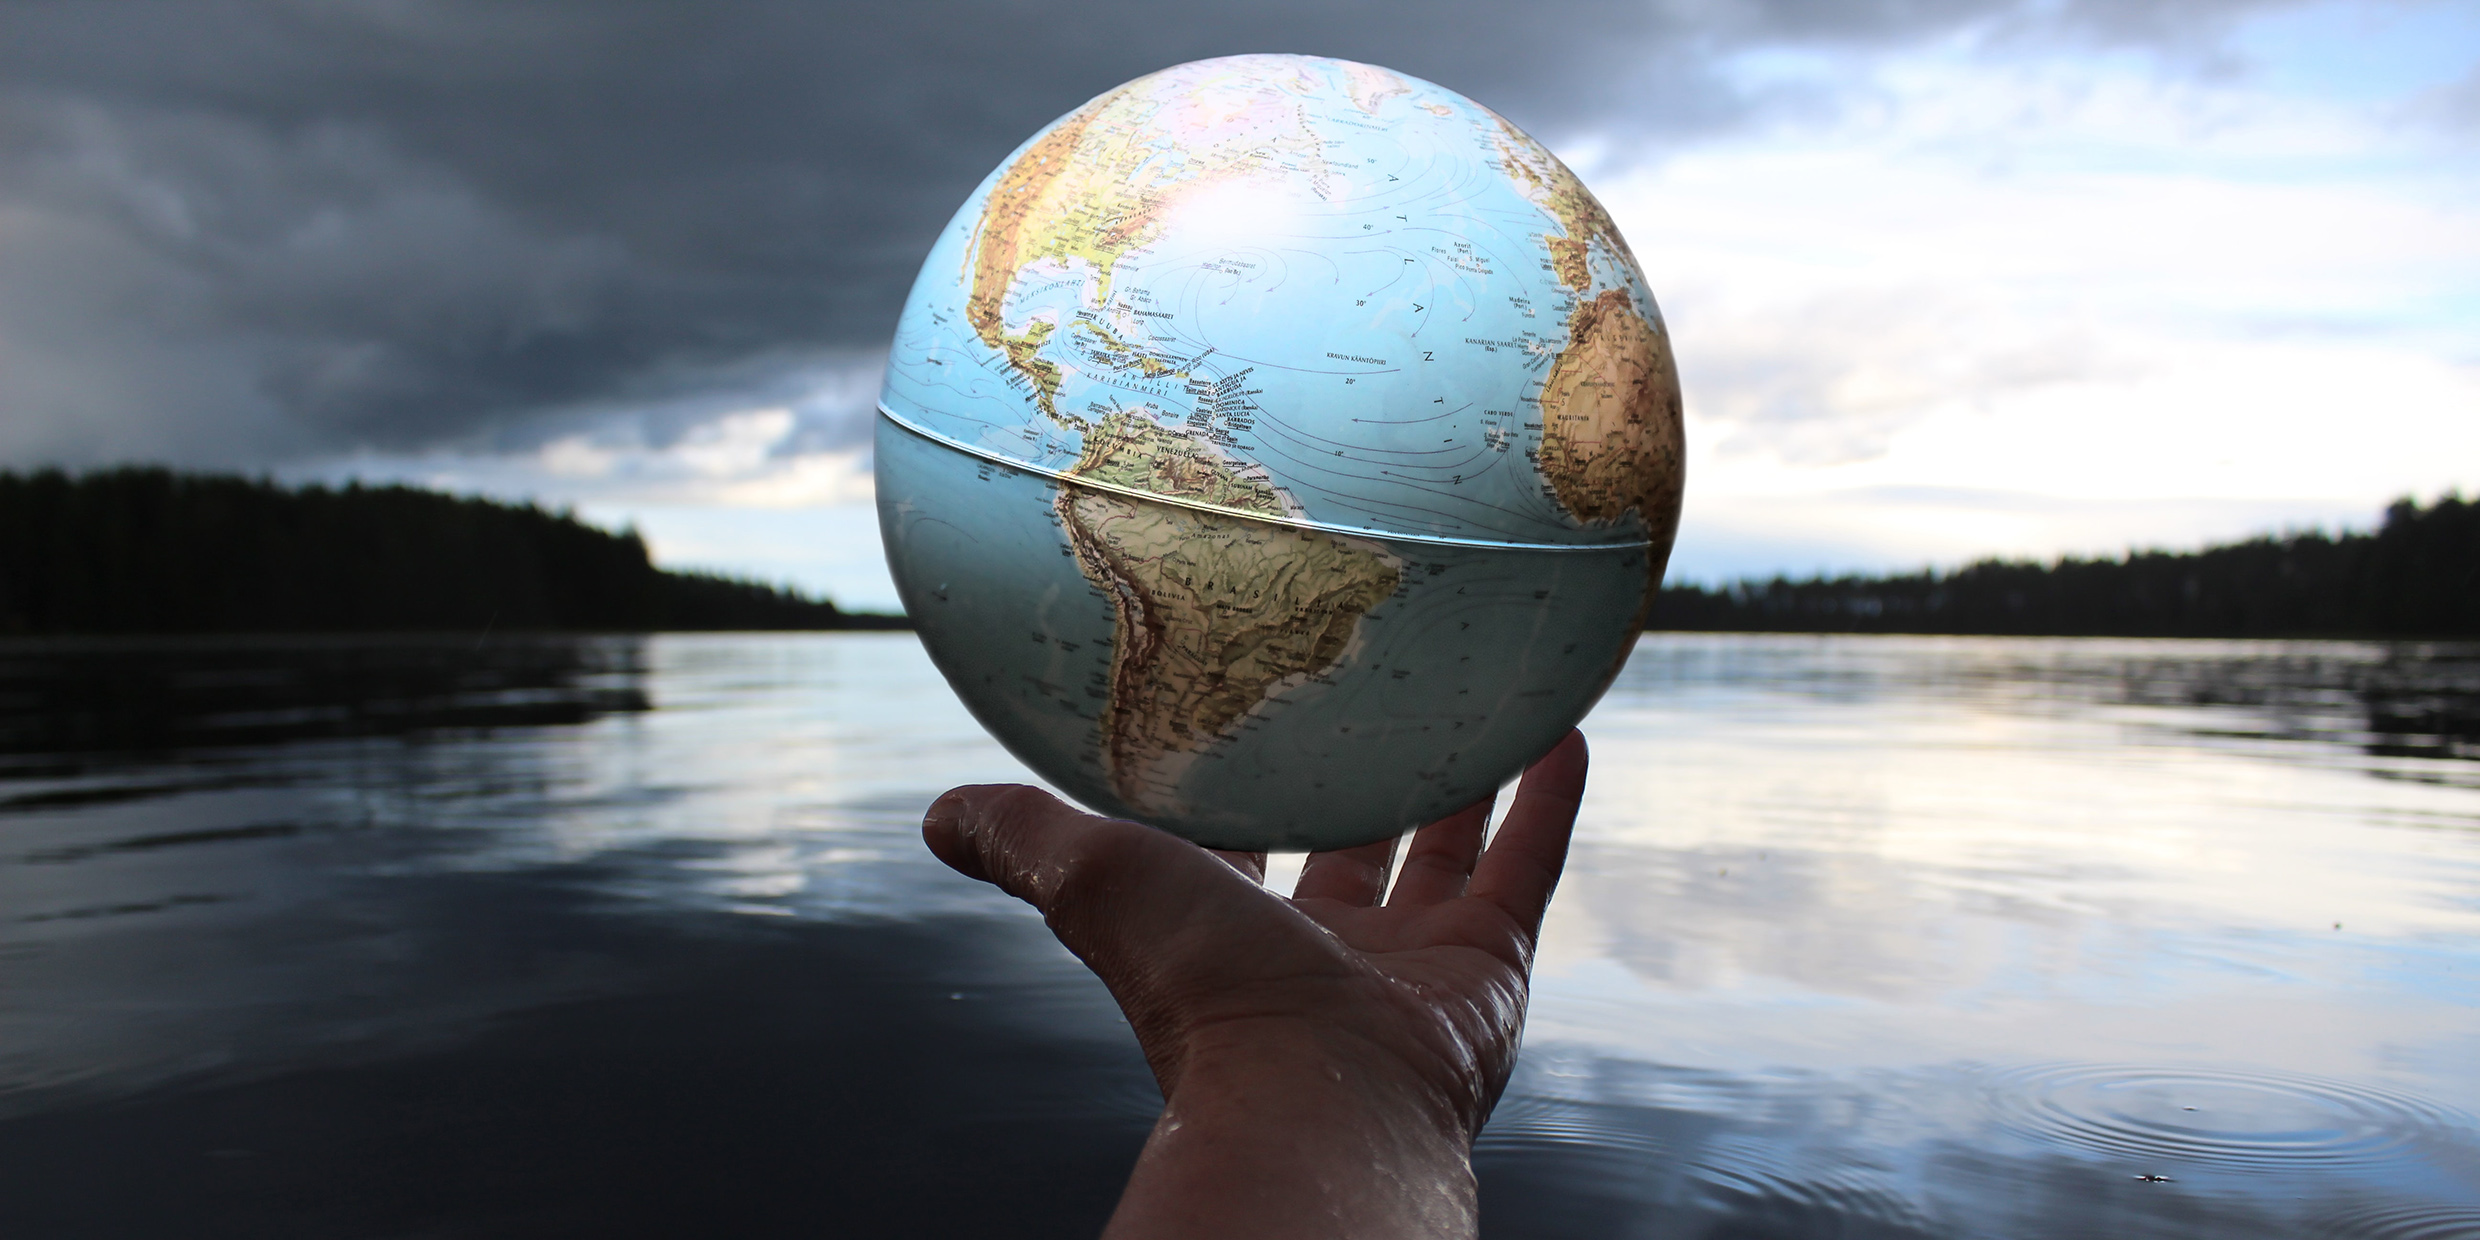 Image of hand holding a small globe in front of a natural environment